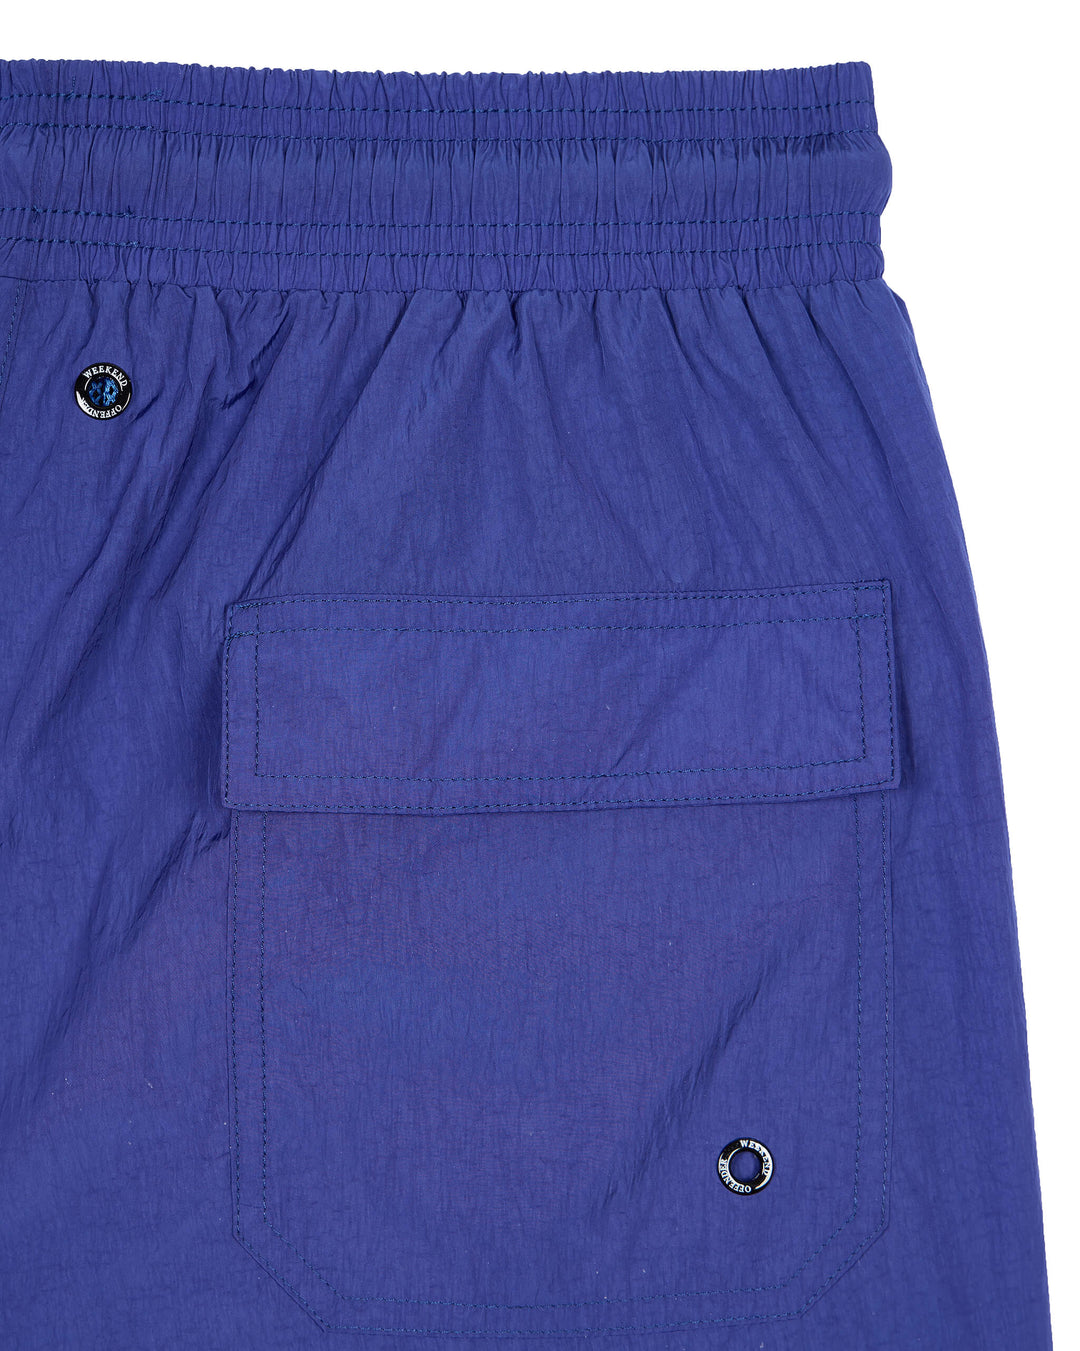 Weekend Offender Stacks Swim Shorts-Electric